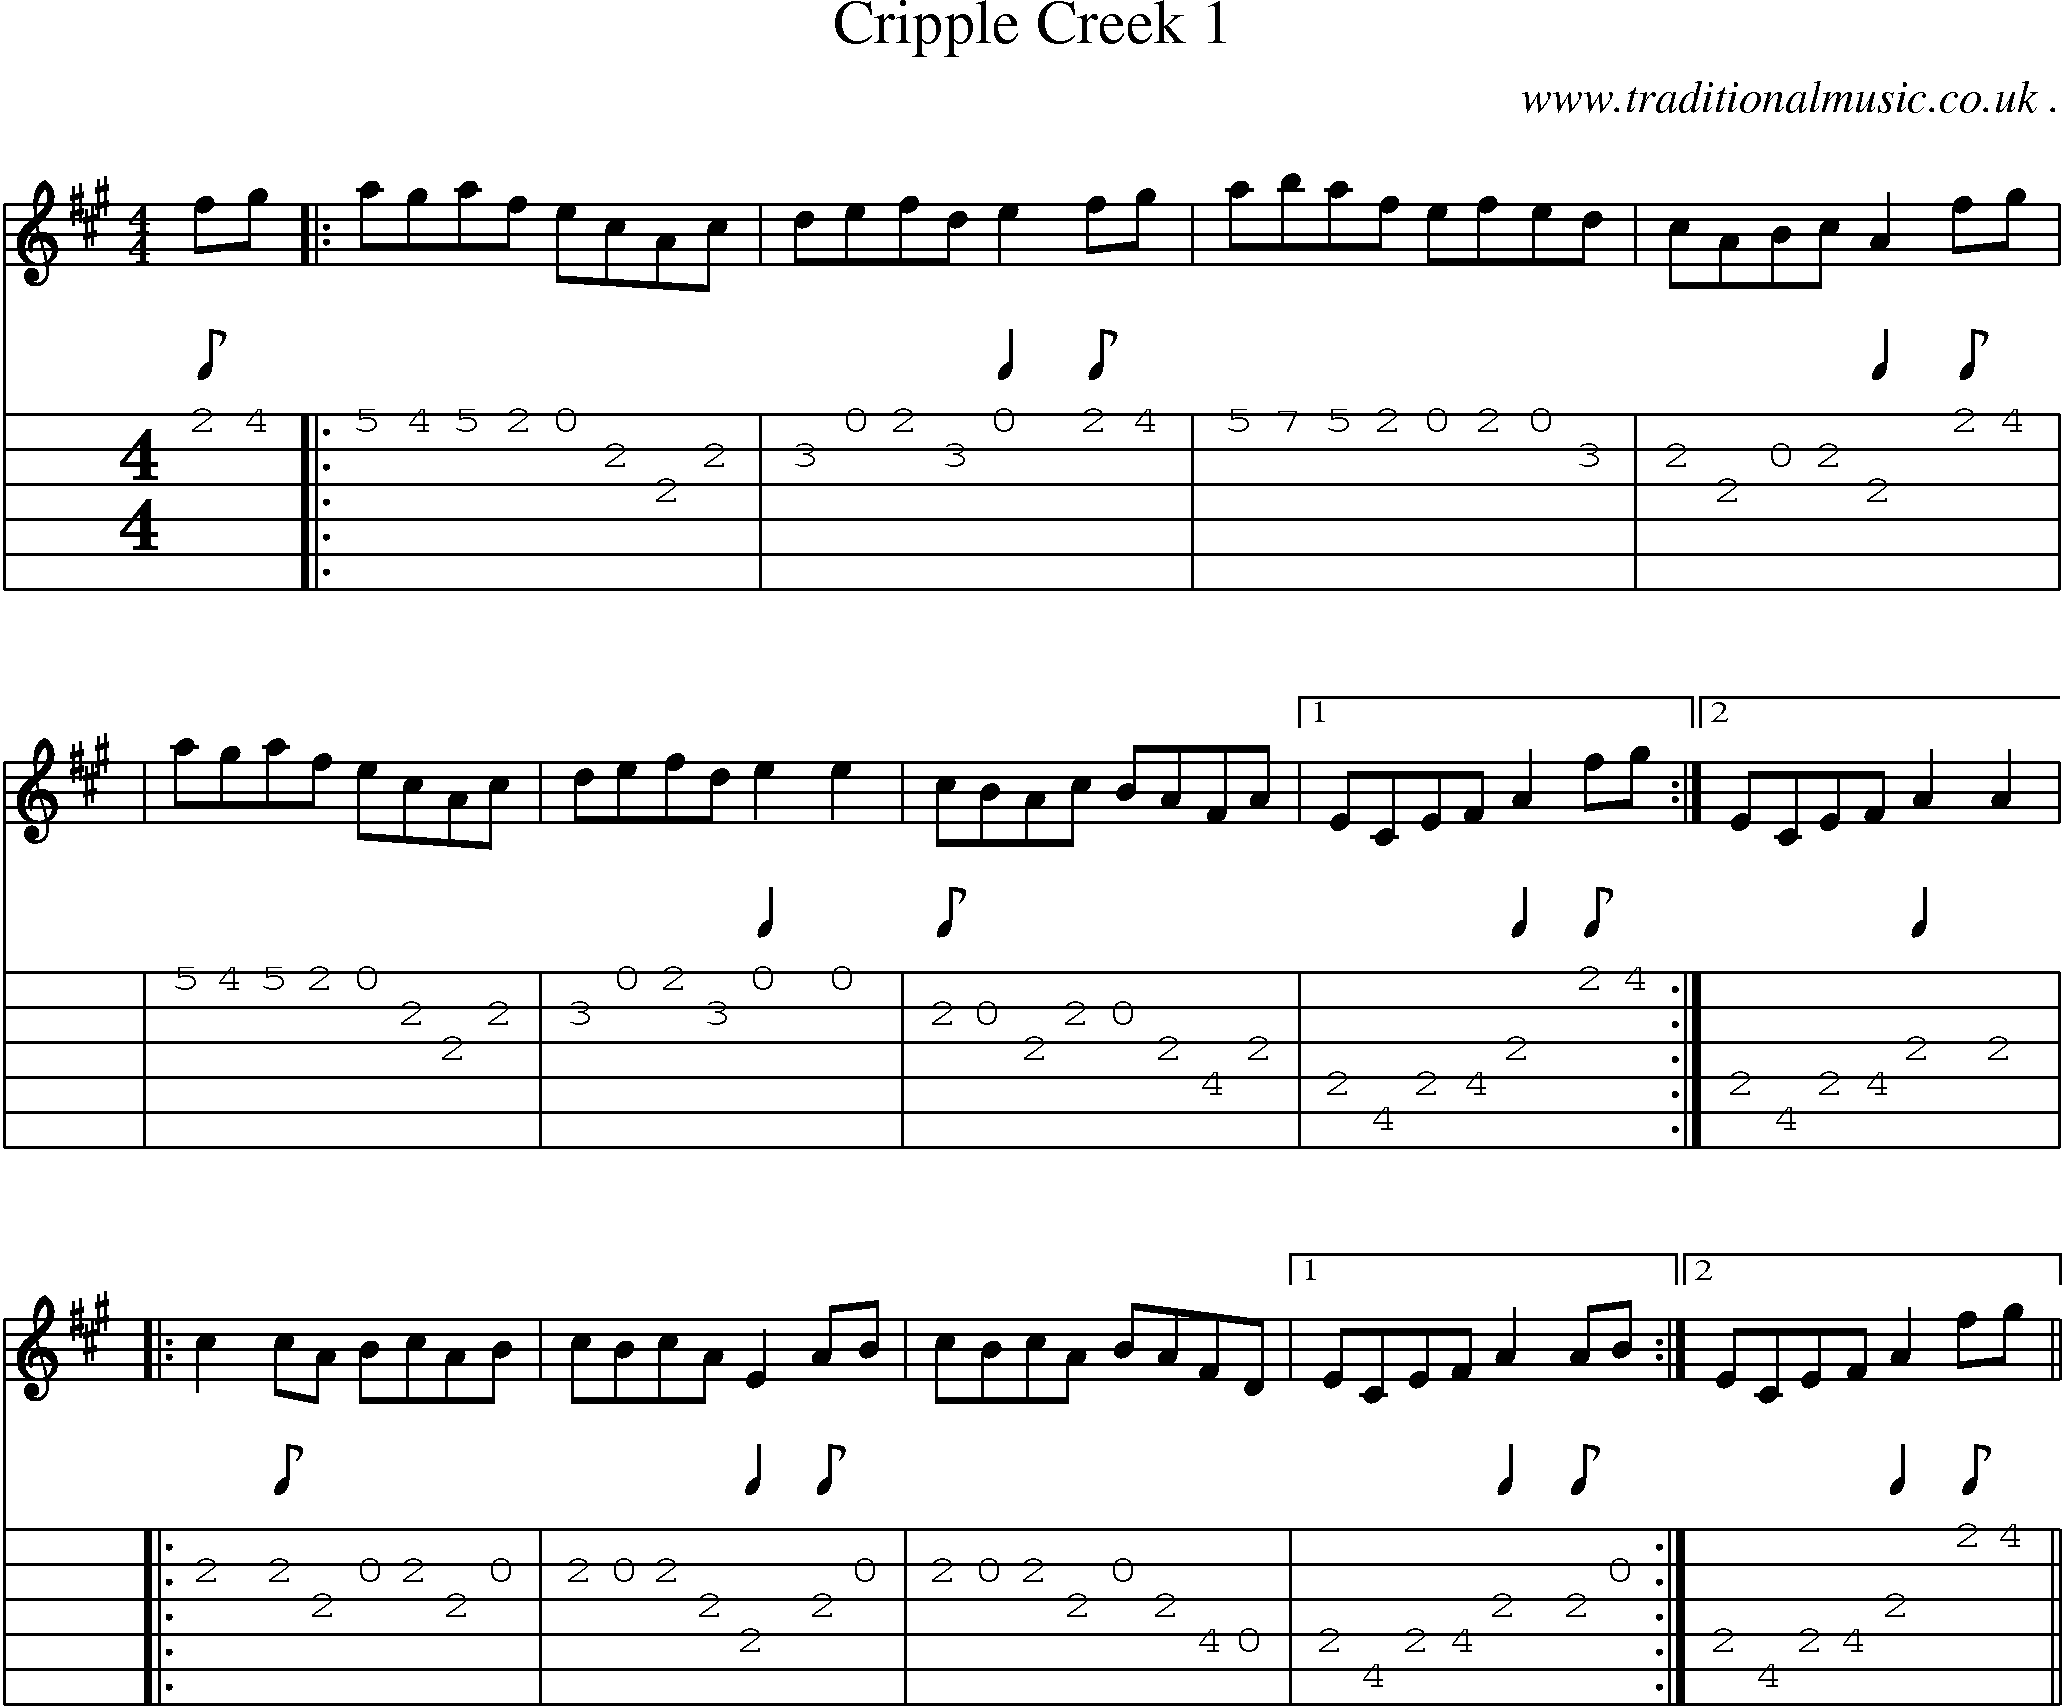 Music Score and Guitar Tabs for Cripple Creek 1